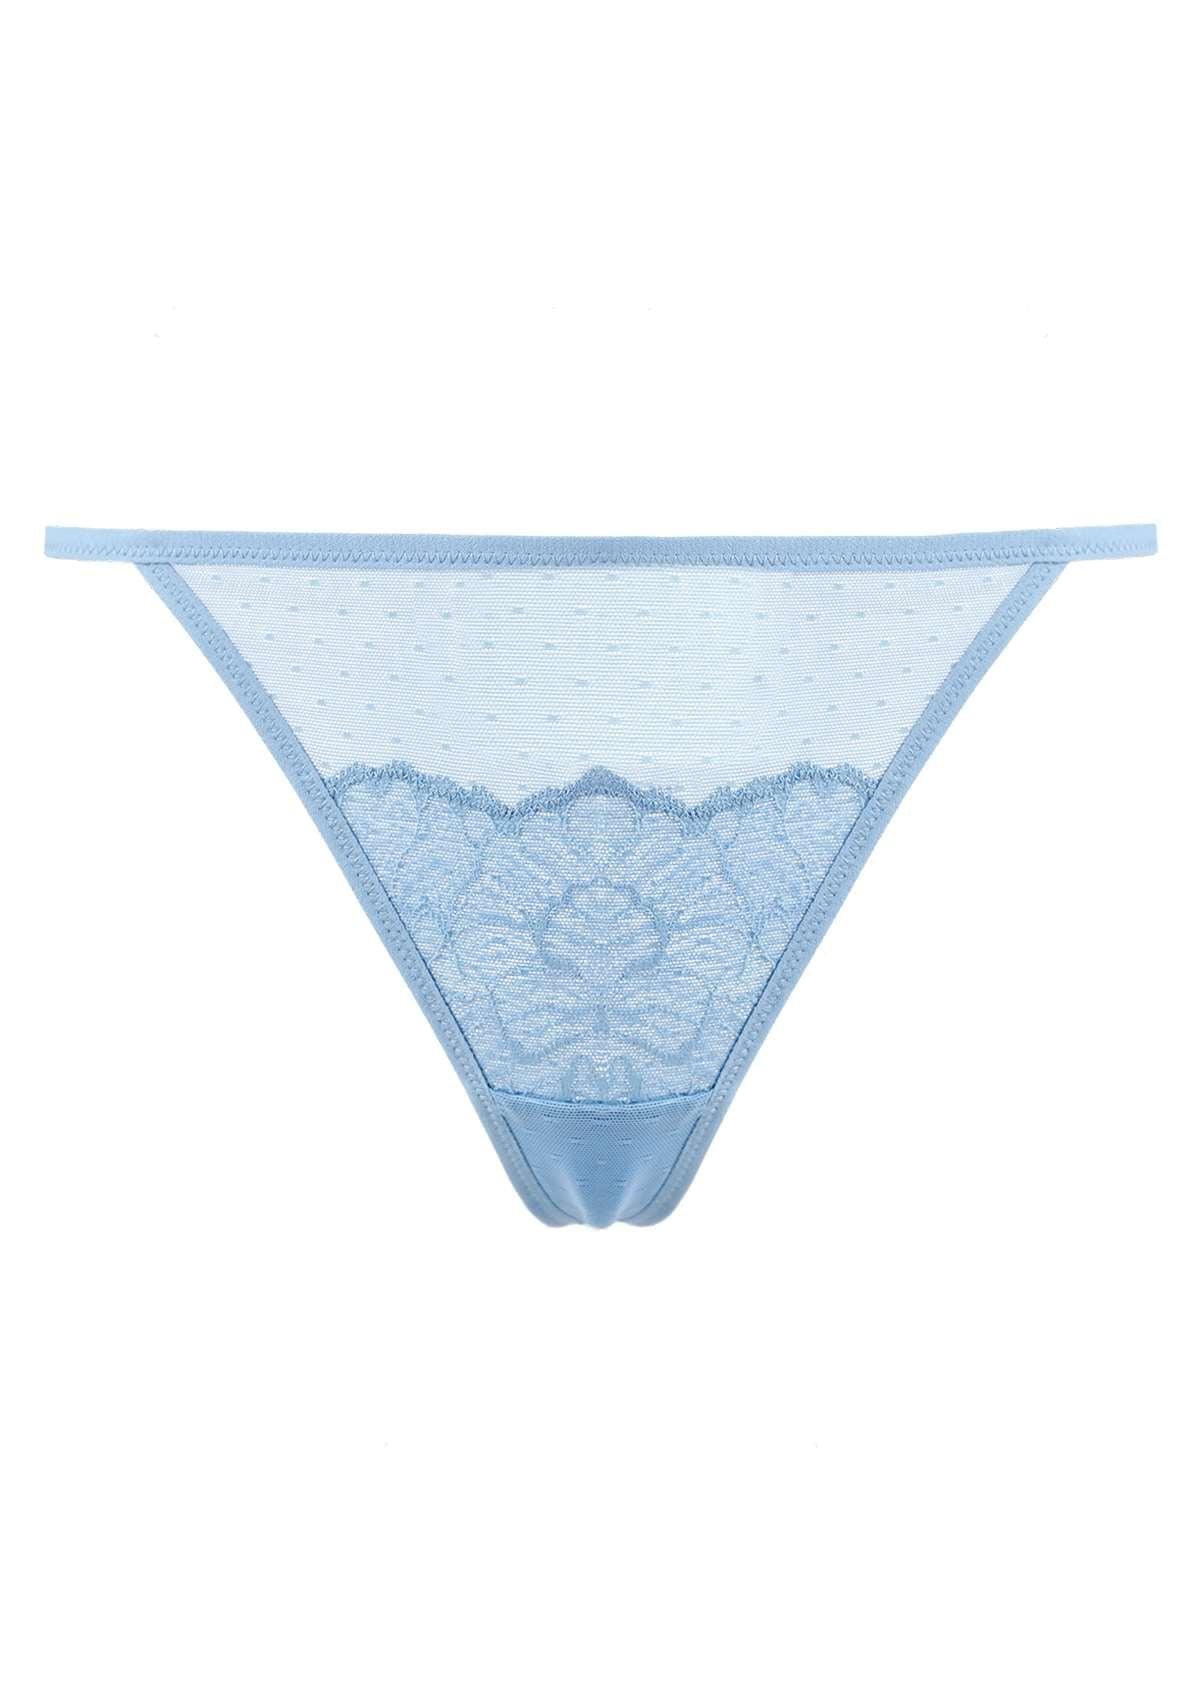 HSIA Blossom Floral Lace Mesh Cheeky Sexy String Thongs - 3 Pack - XL / Storm Blue+Dark Pink+Black